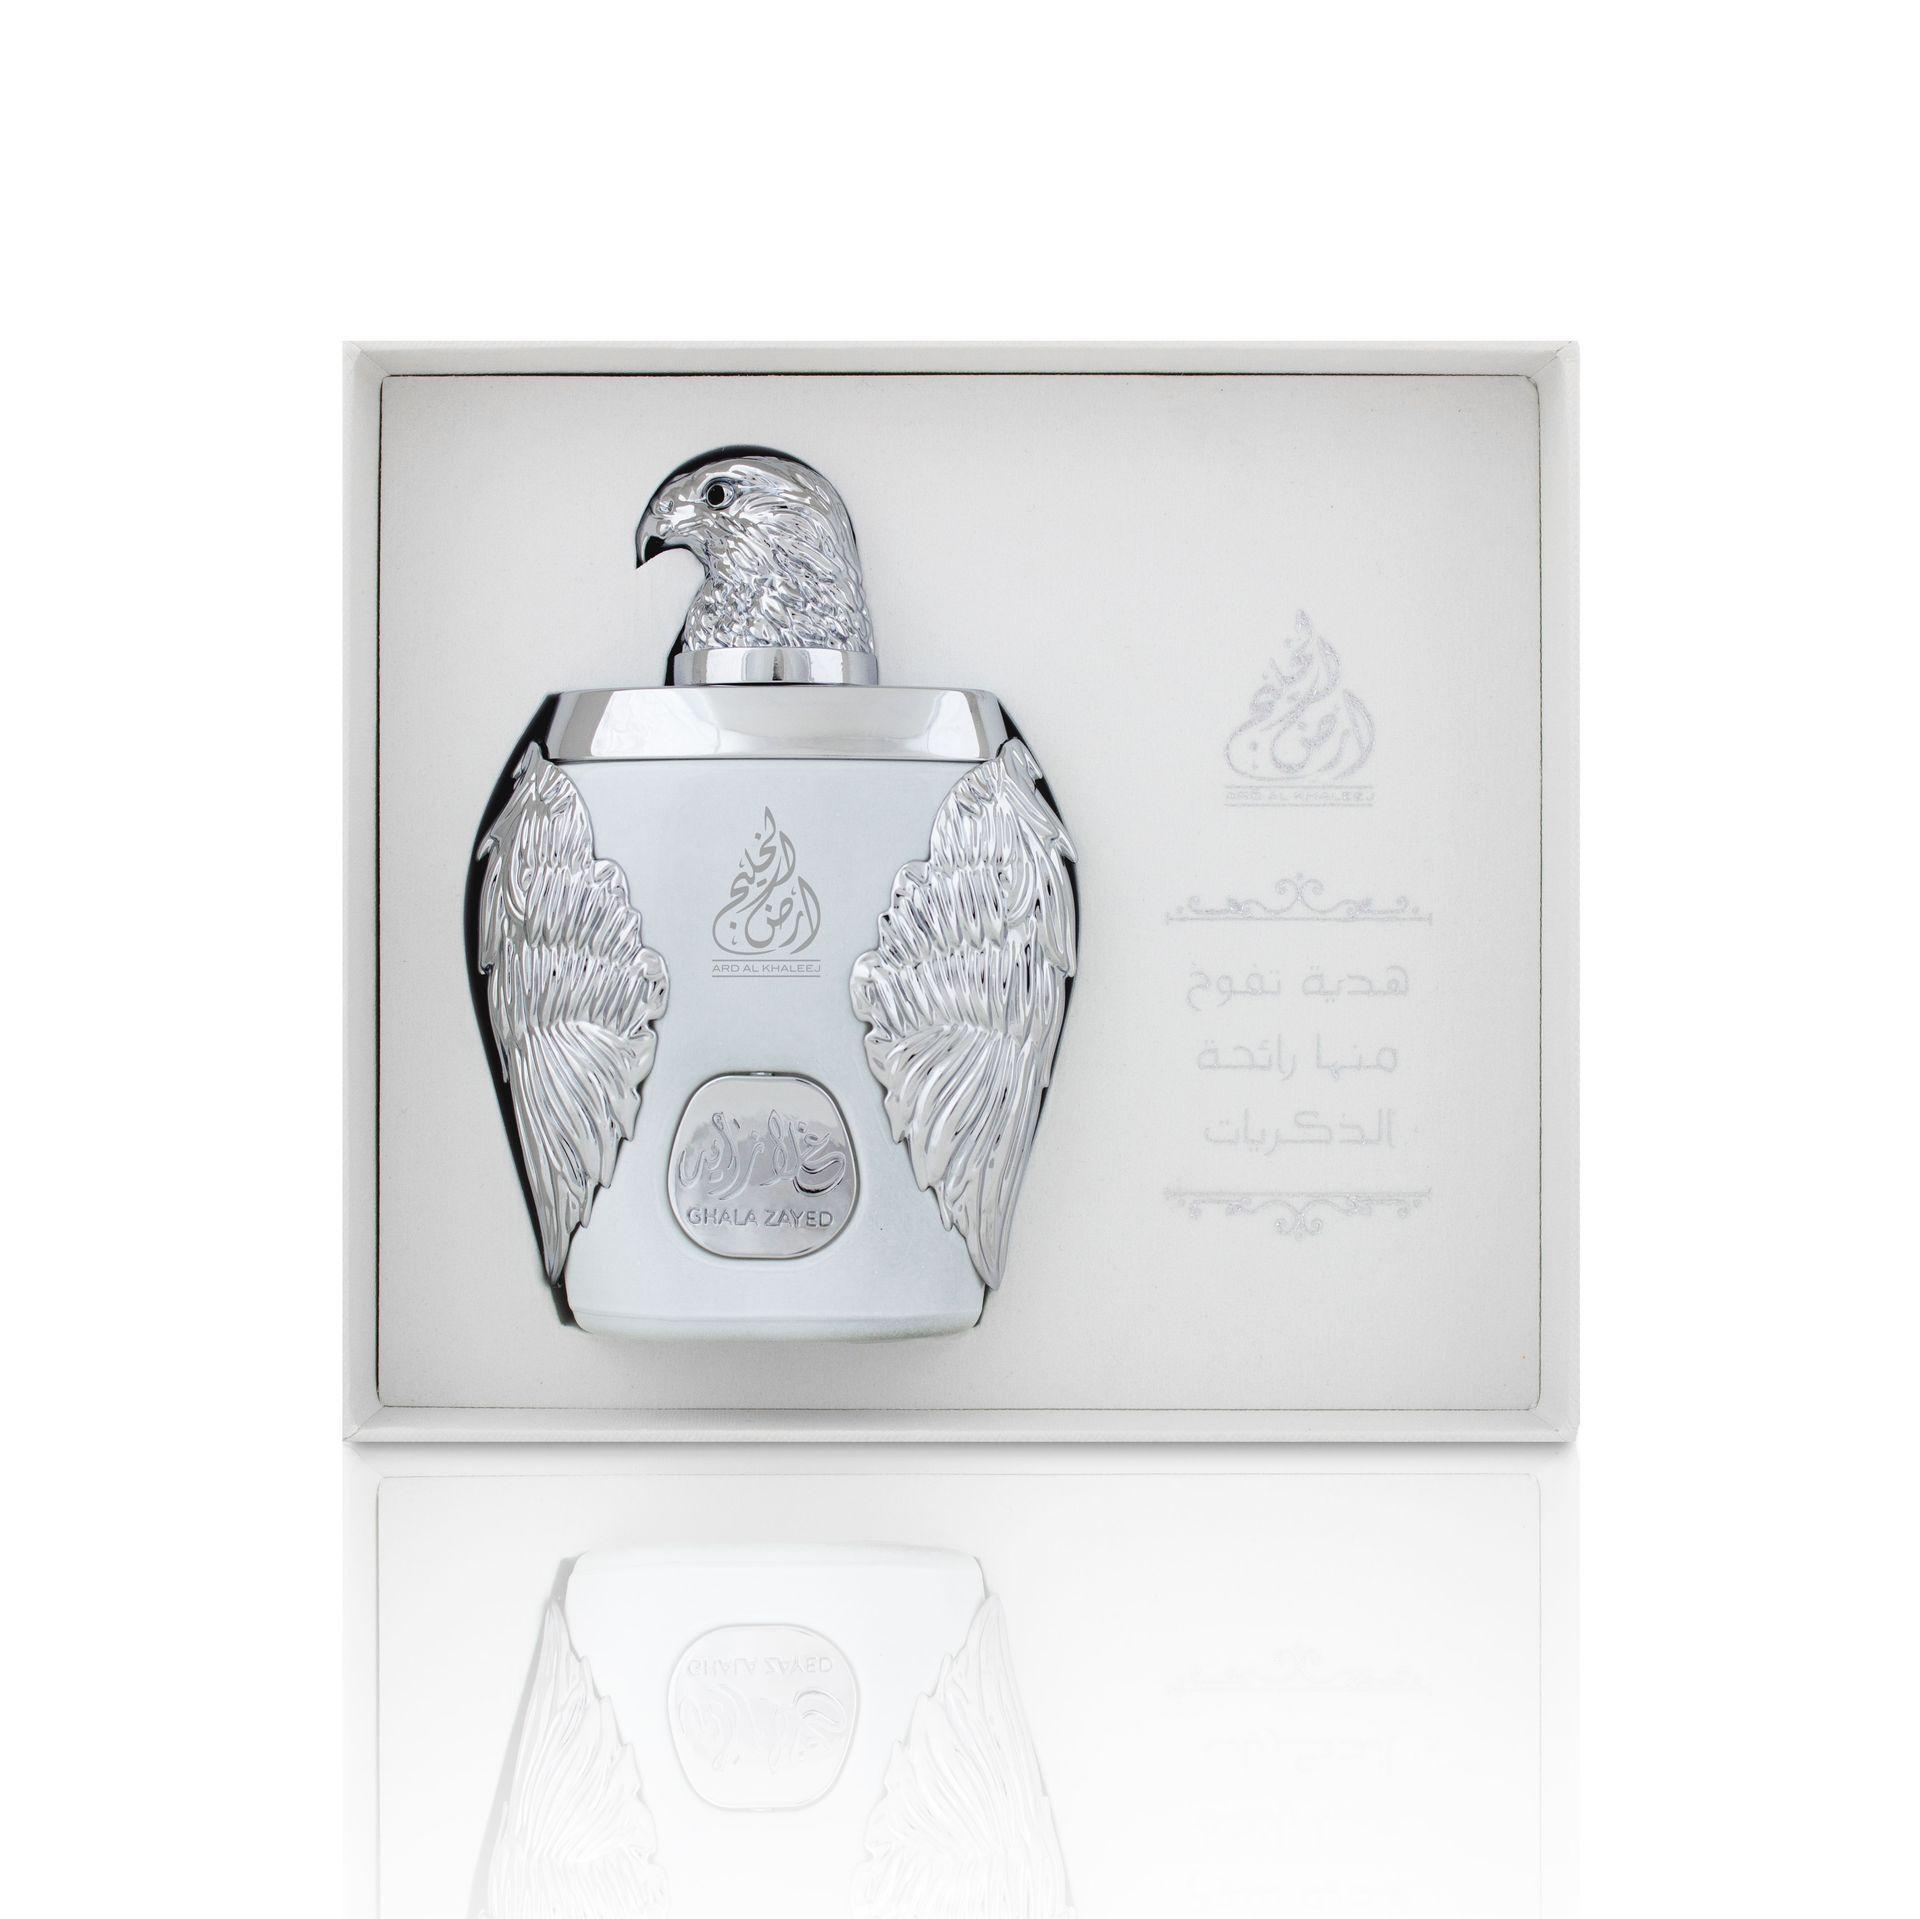 Ghala Zayed Luxury Silver Perfume Eau De Parfum 100Ml By Ard Al Khaleej Introducing Ghala Zayed Luxury Silver Perfume / Eau De Parfum 100Ml By Ard Al Khaleej, A Testament To Timeless Elegance And Sophistication. This Men'S Fragrance Is A Symphony Of Scents Meticulously Composed To Make An Enduring Impression. Soghaat Gifts &Amp; Fragrances